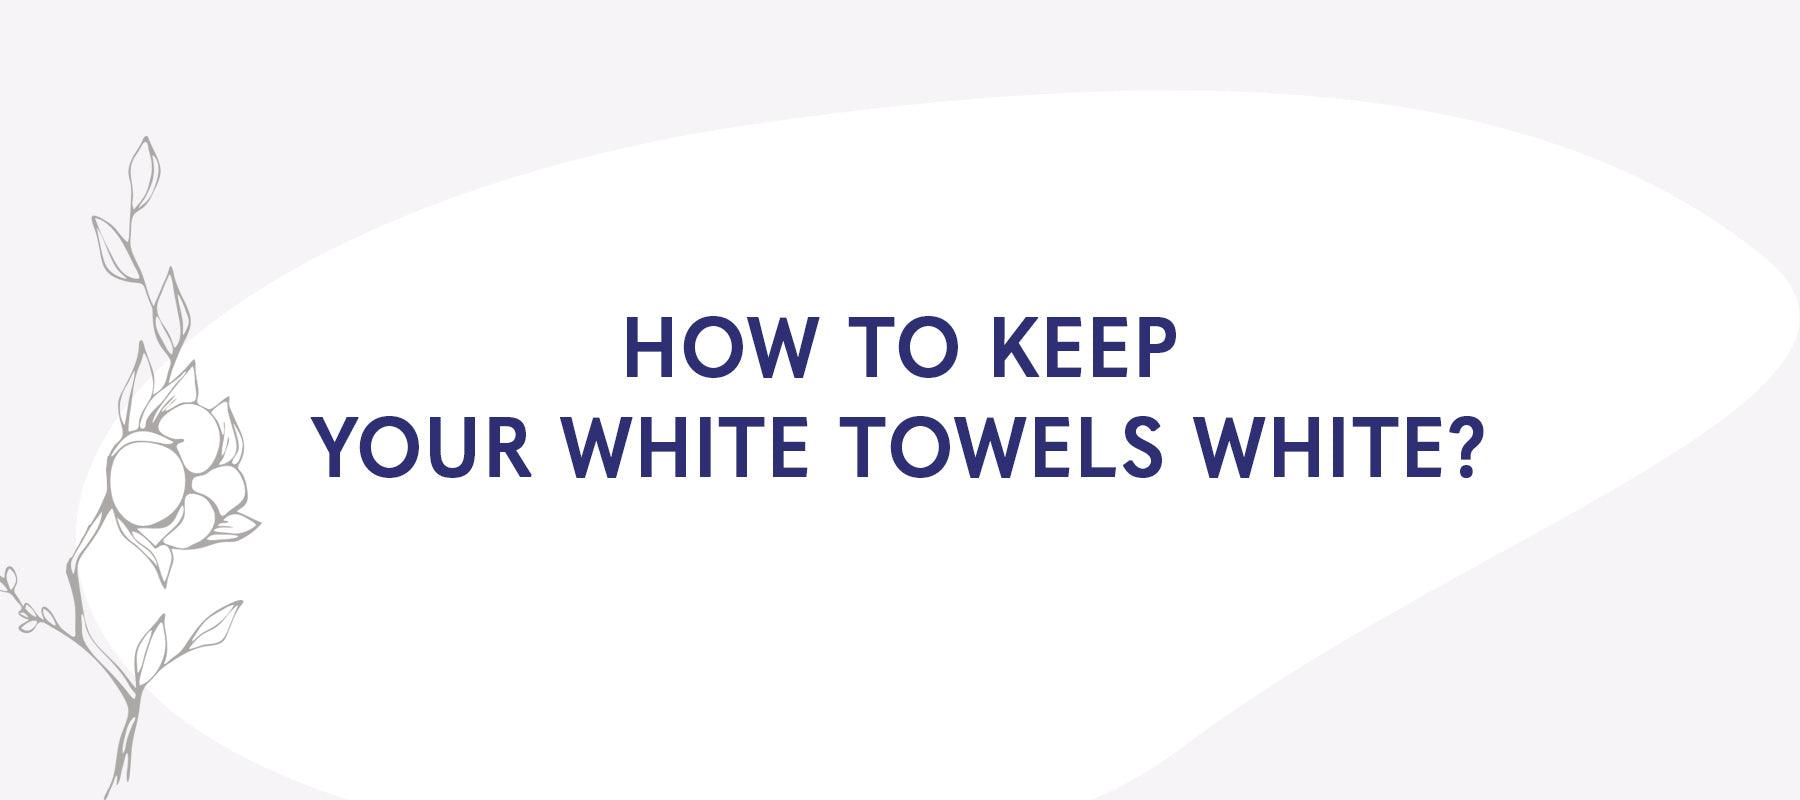 How to Keep Your White Towels White - American Soft Linen